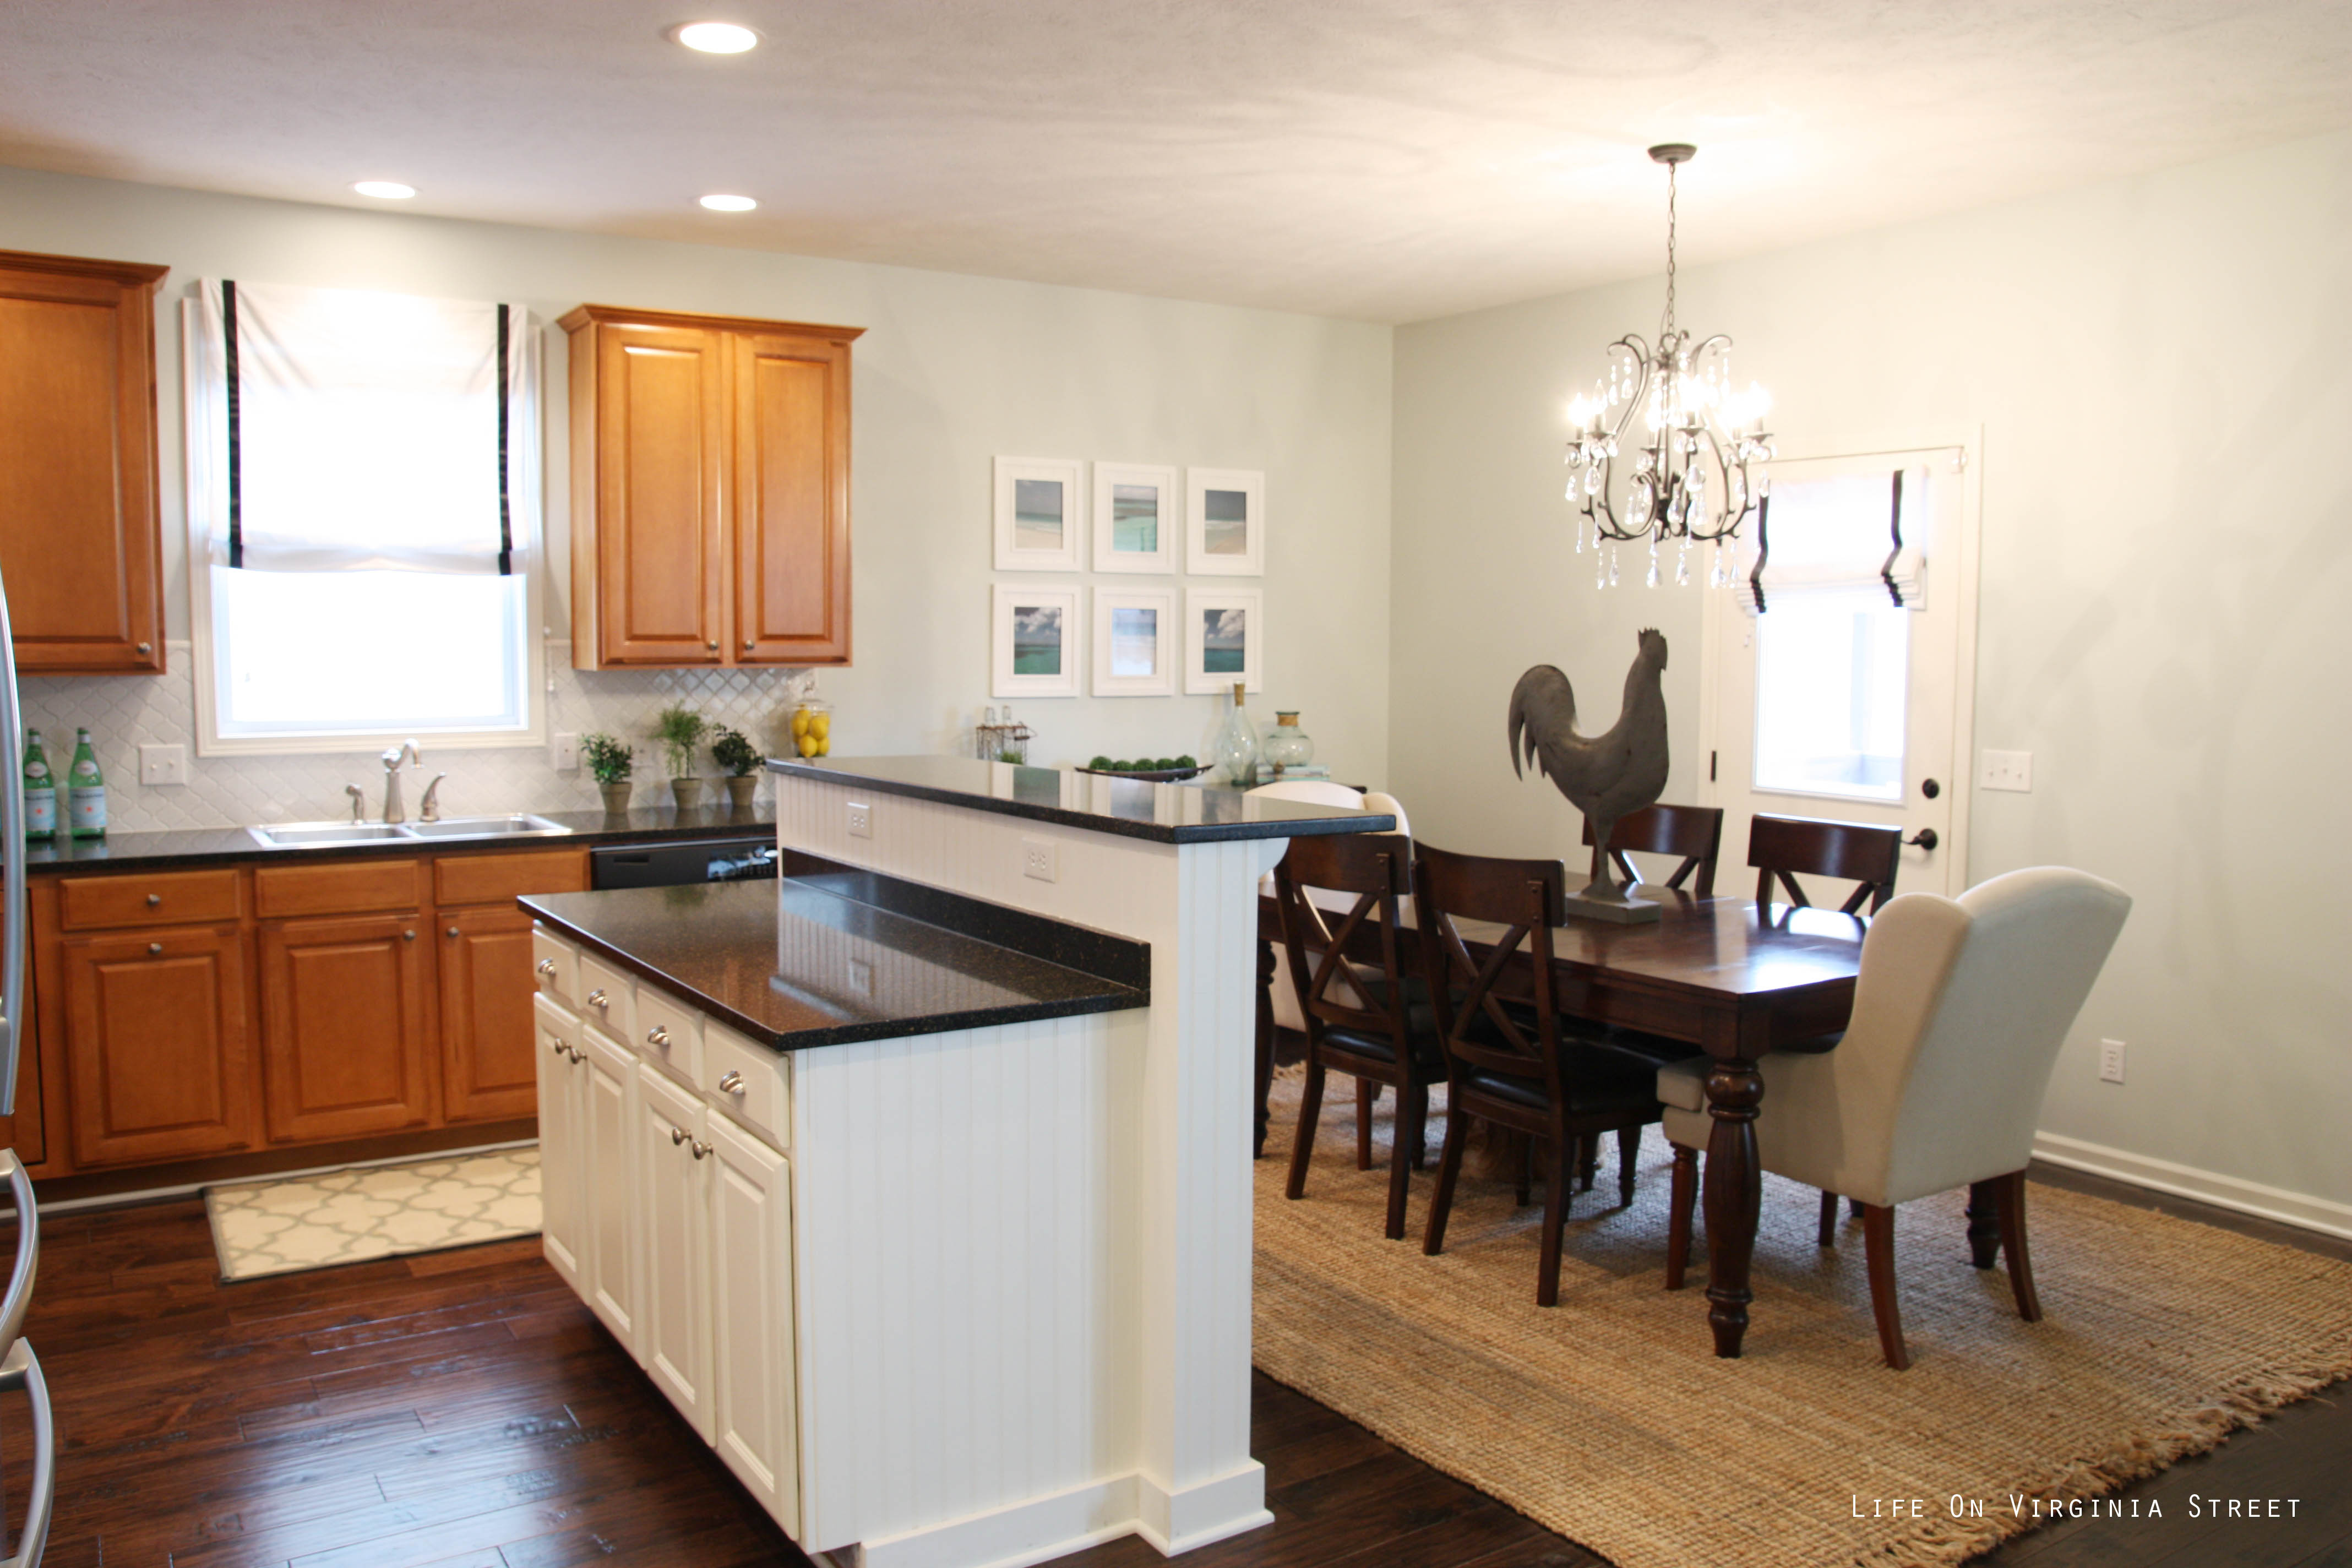 Find prior colors of our kitchen and dining room here.